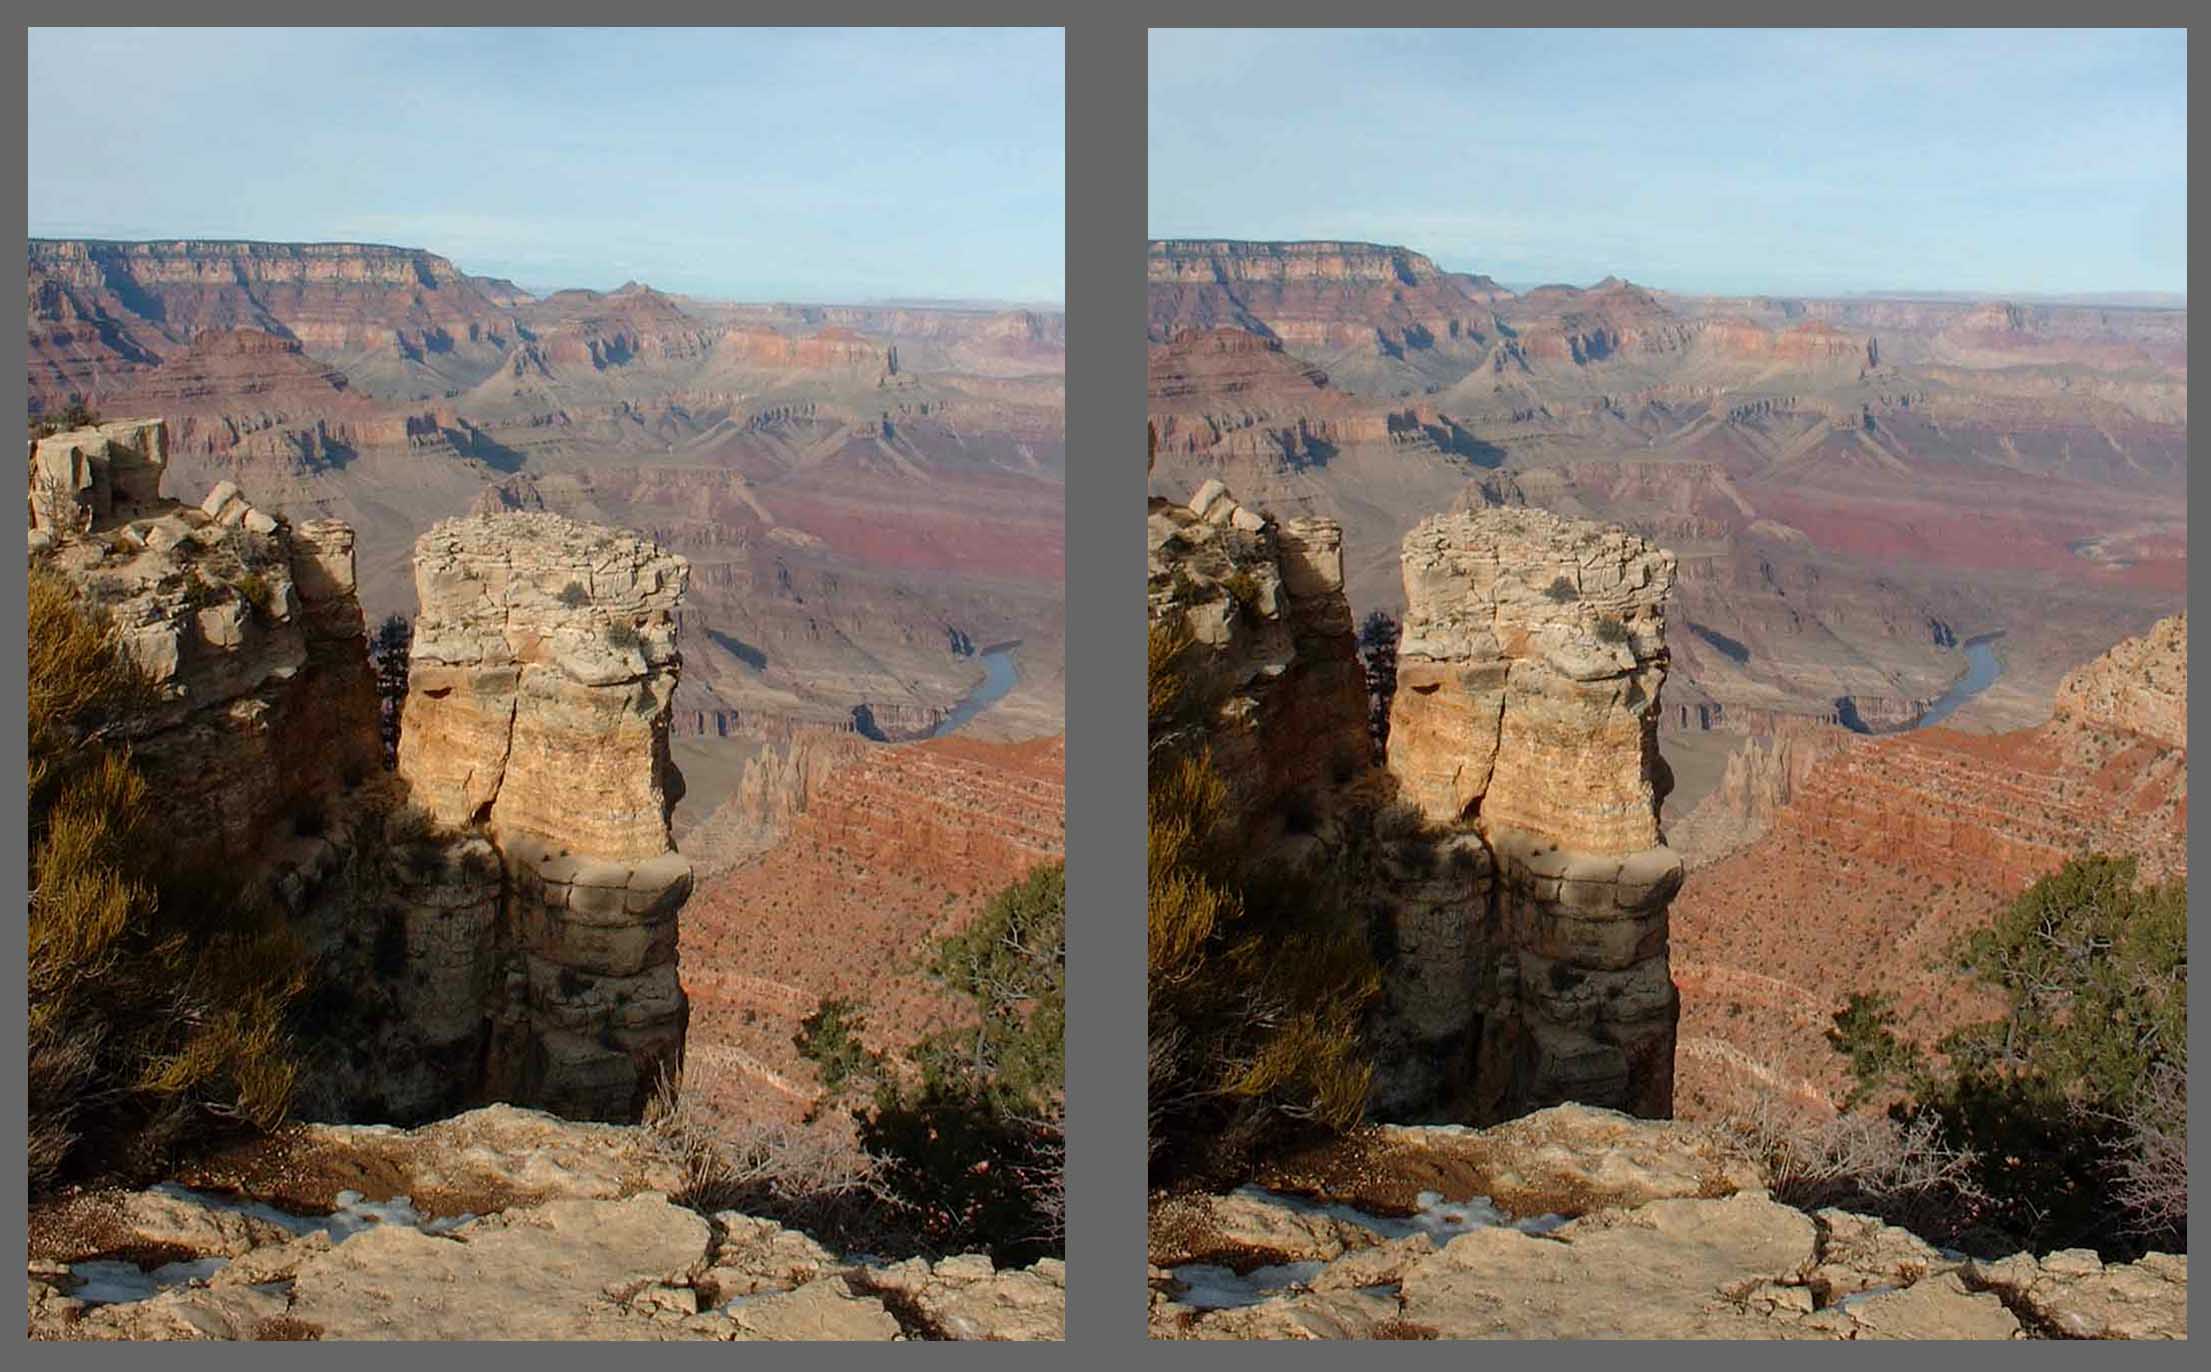 Stereo Photo - Grand Canyon View C - Cross-eyed viewing method